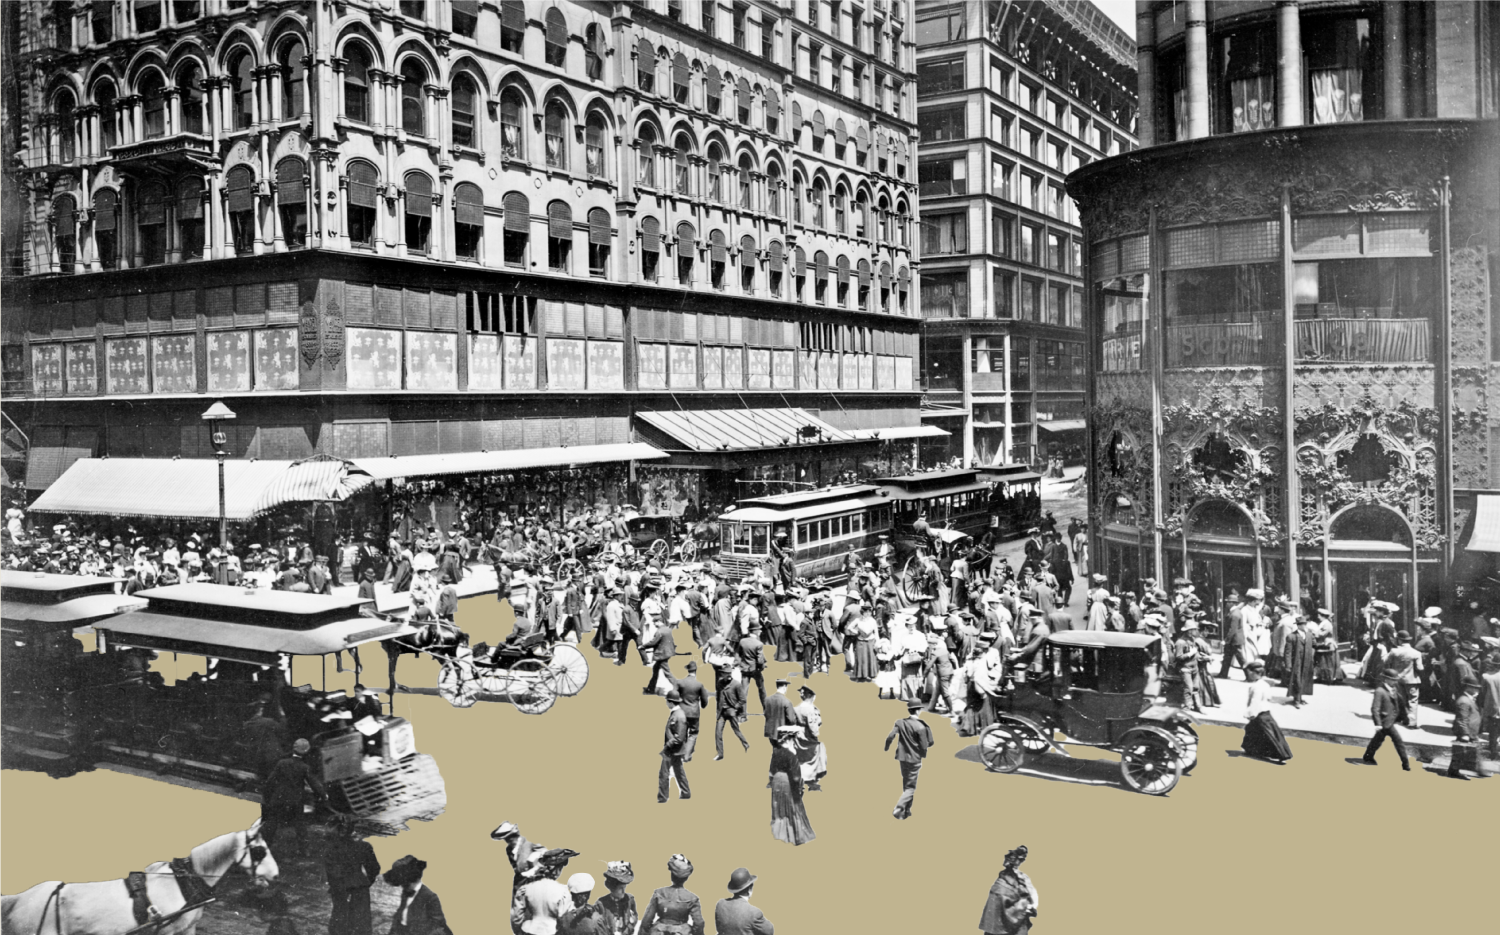 A black-and-white image is cut up to reveal human figures moving in an urban setting, where the background streetscape has largely been removed. The buildings remain. 